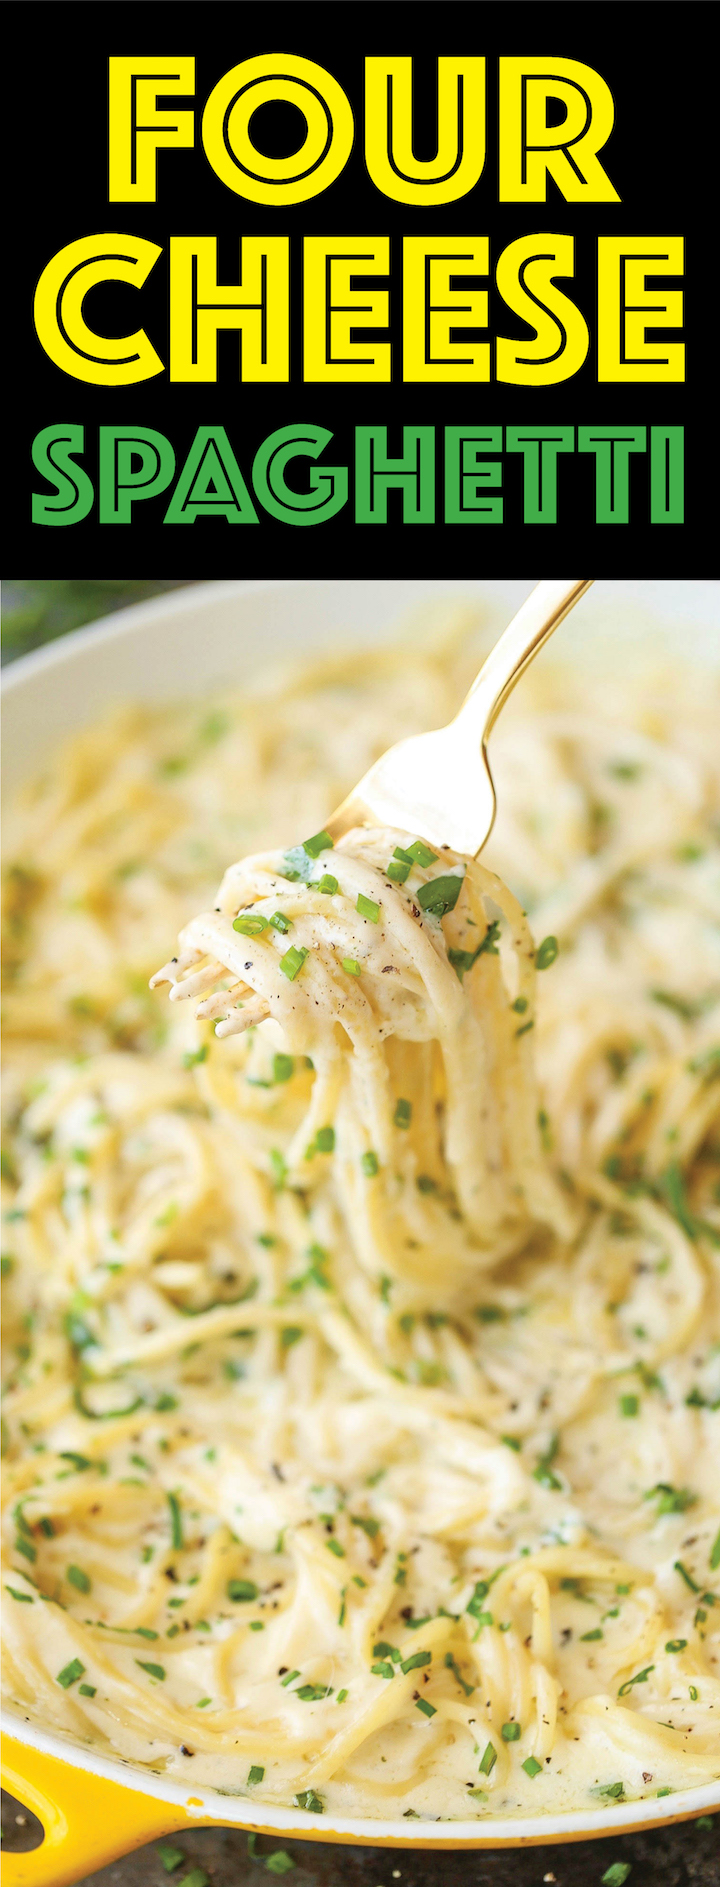 Four Cheese Spaghetti - AMAZINGLY creamy and so velvety with literally 4 different types of cheeses here! It's quick/easy and perfect for company too!